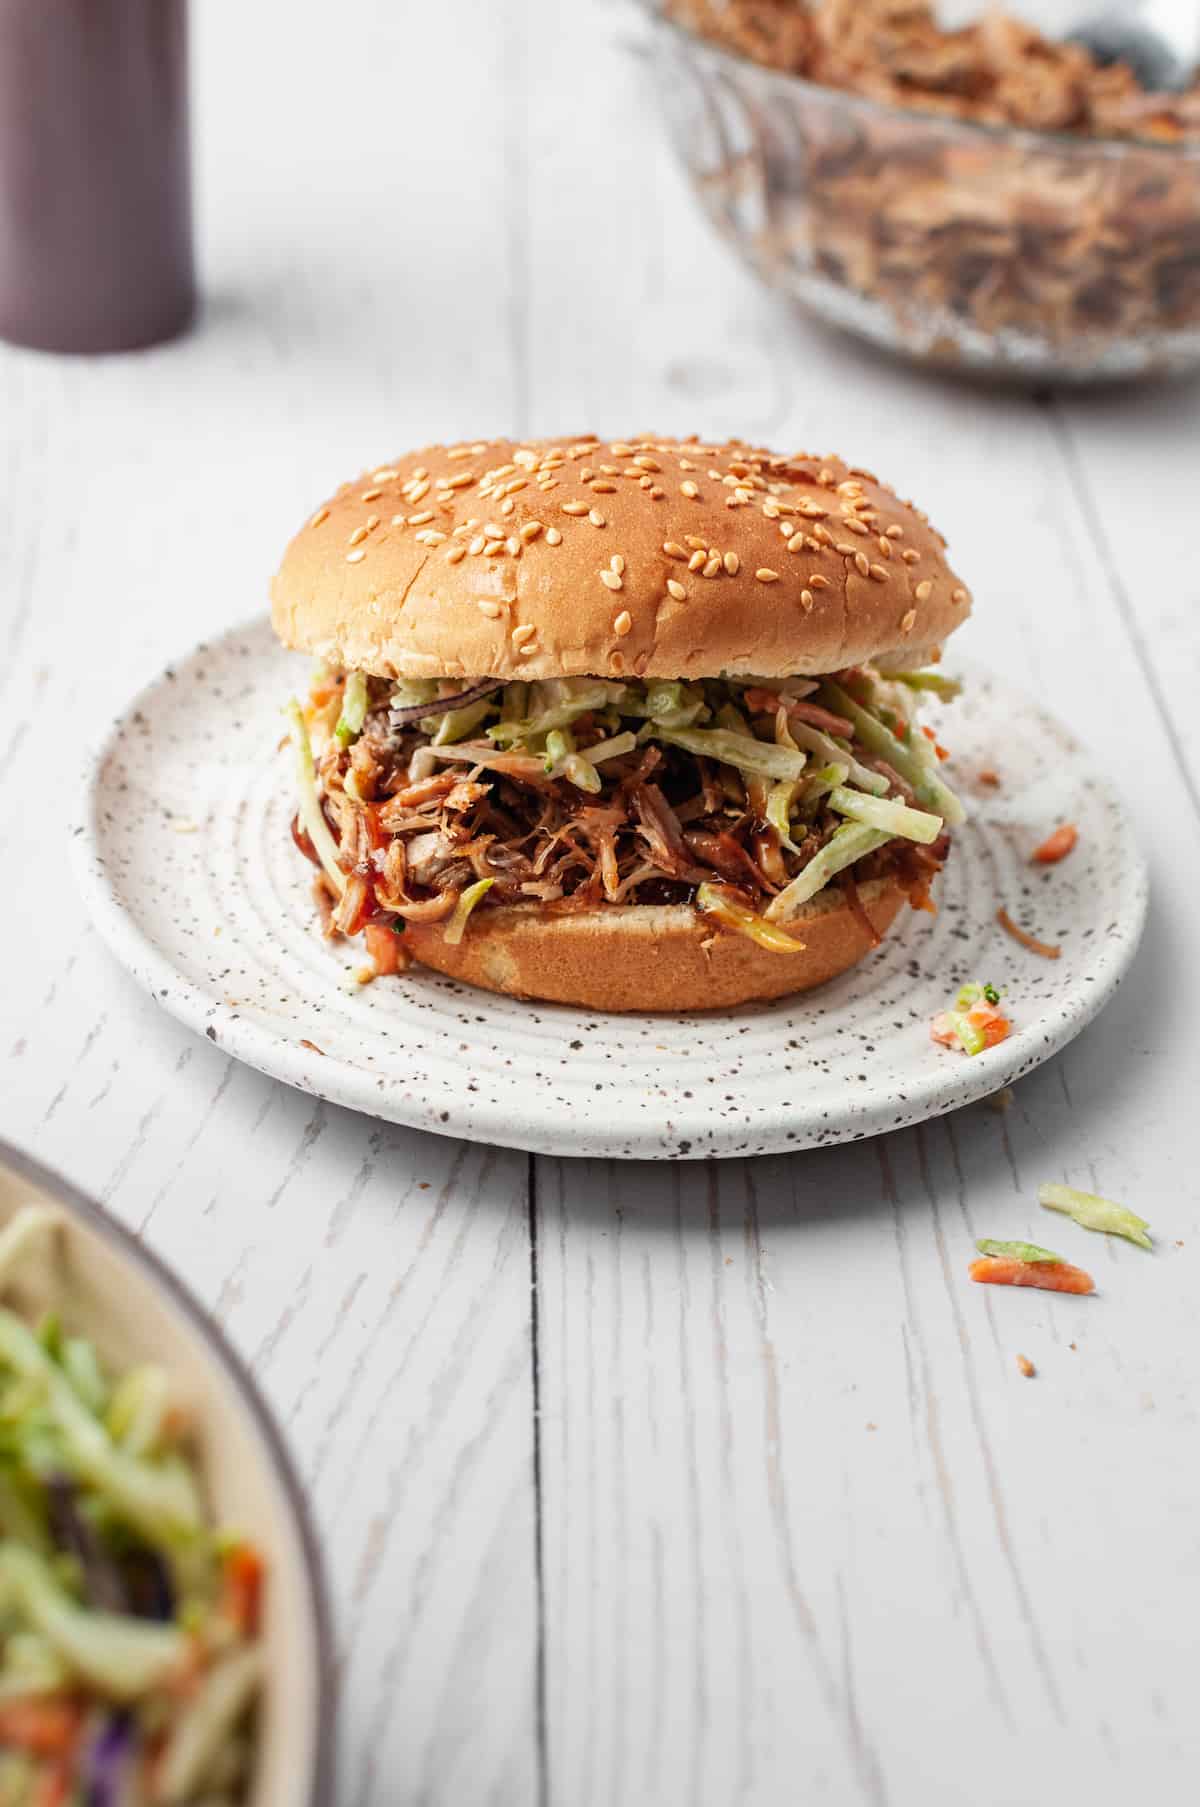 Pulled pork sandwich on plate with coleslaw